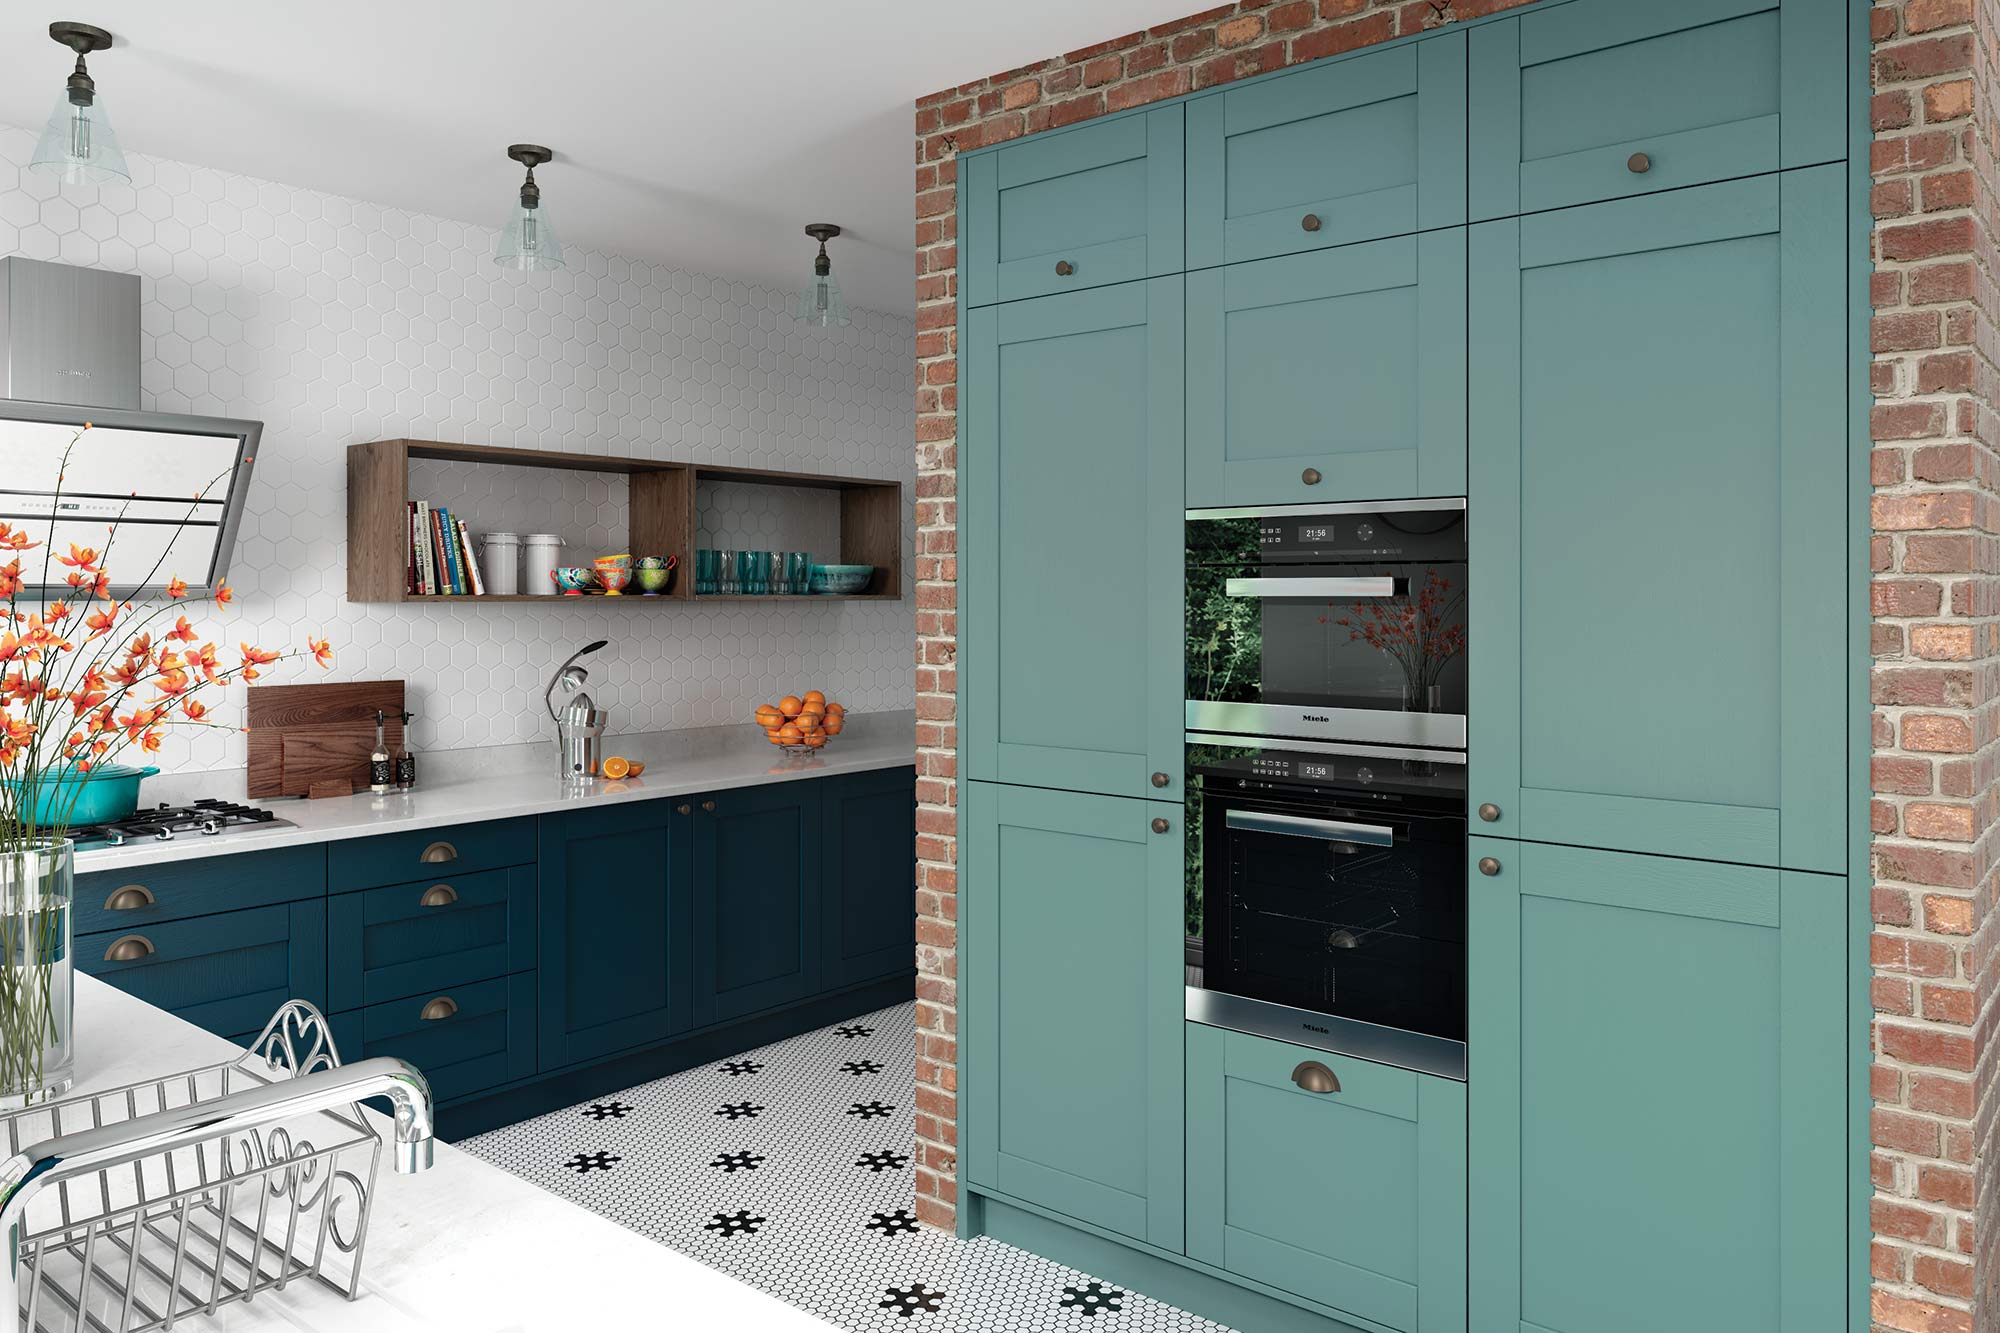 Contemporary style shaker kitchen in marine blue and teal green main picture